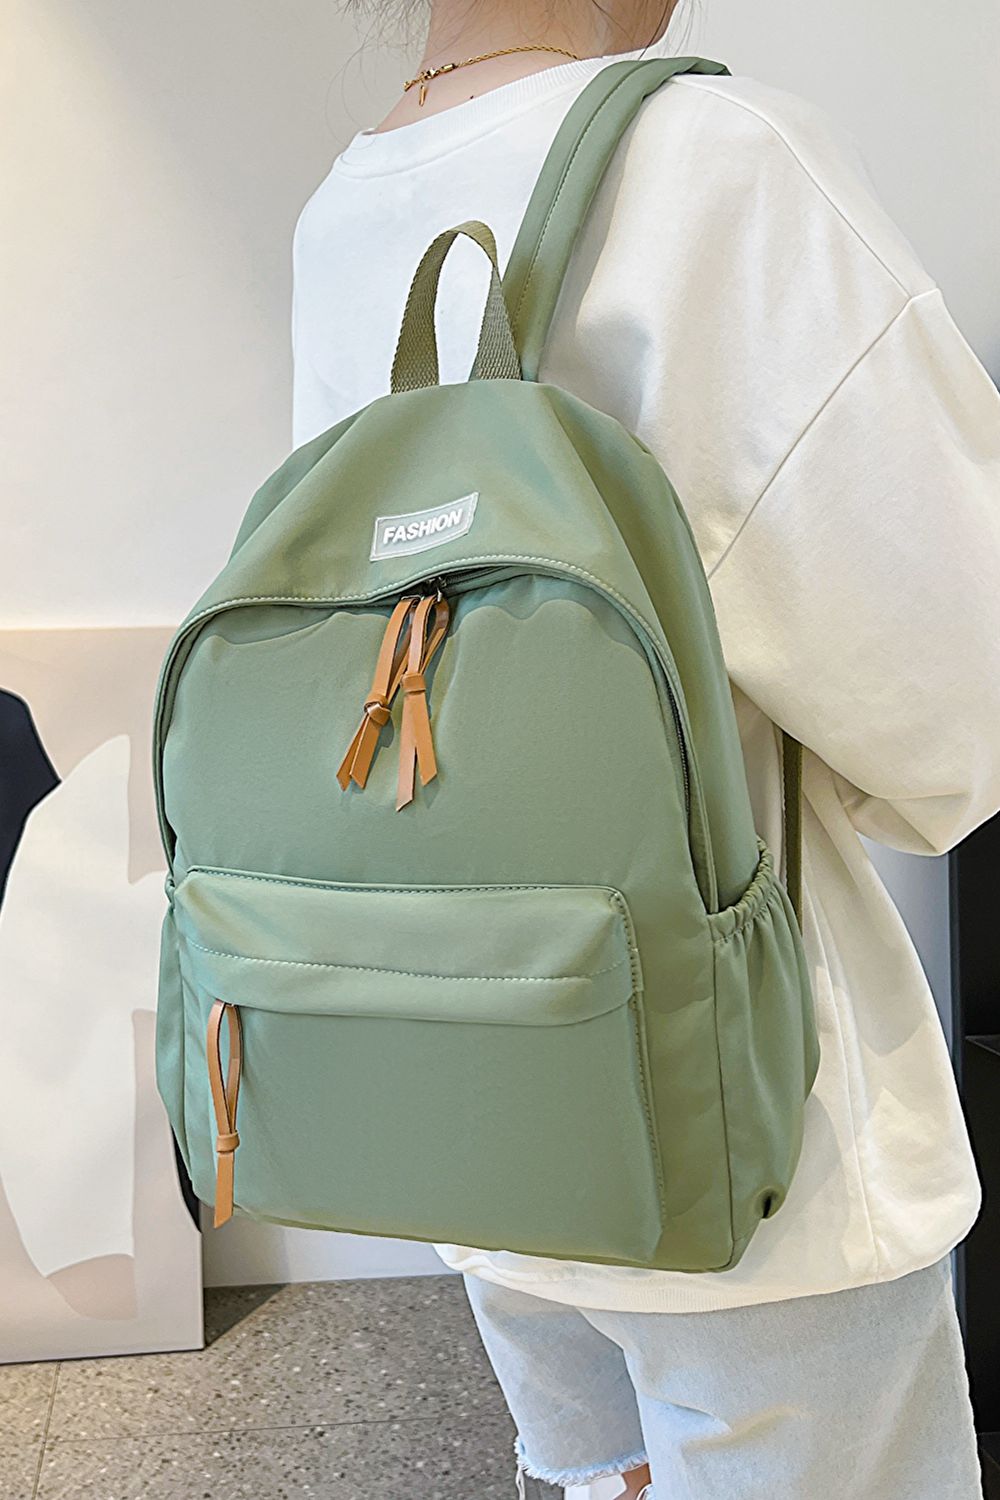 Gray FASHION Polyester Backpack